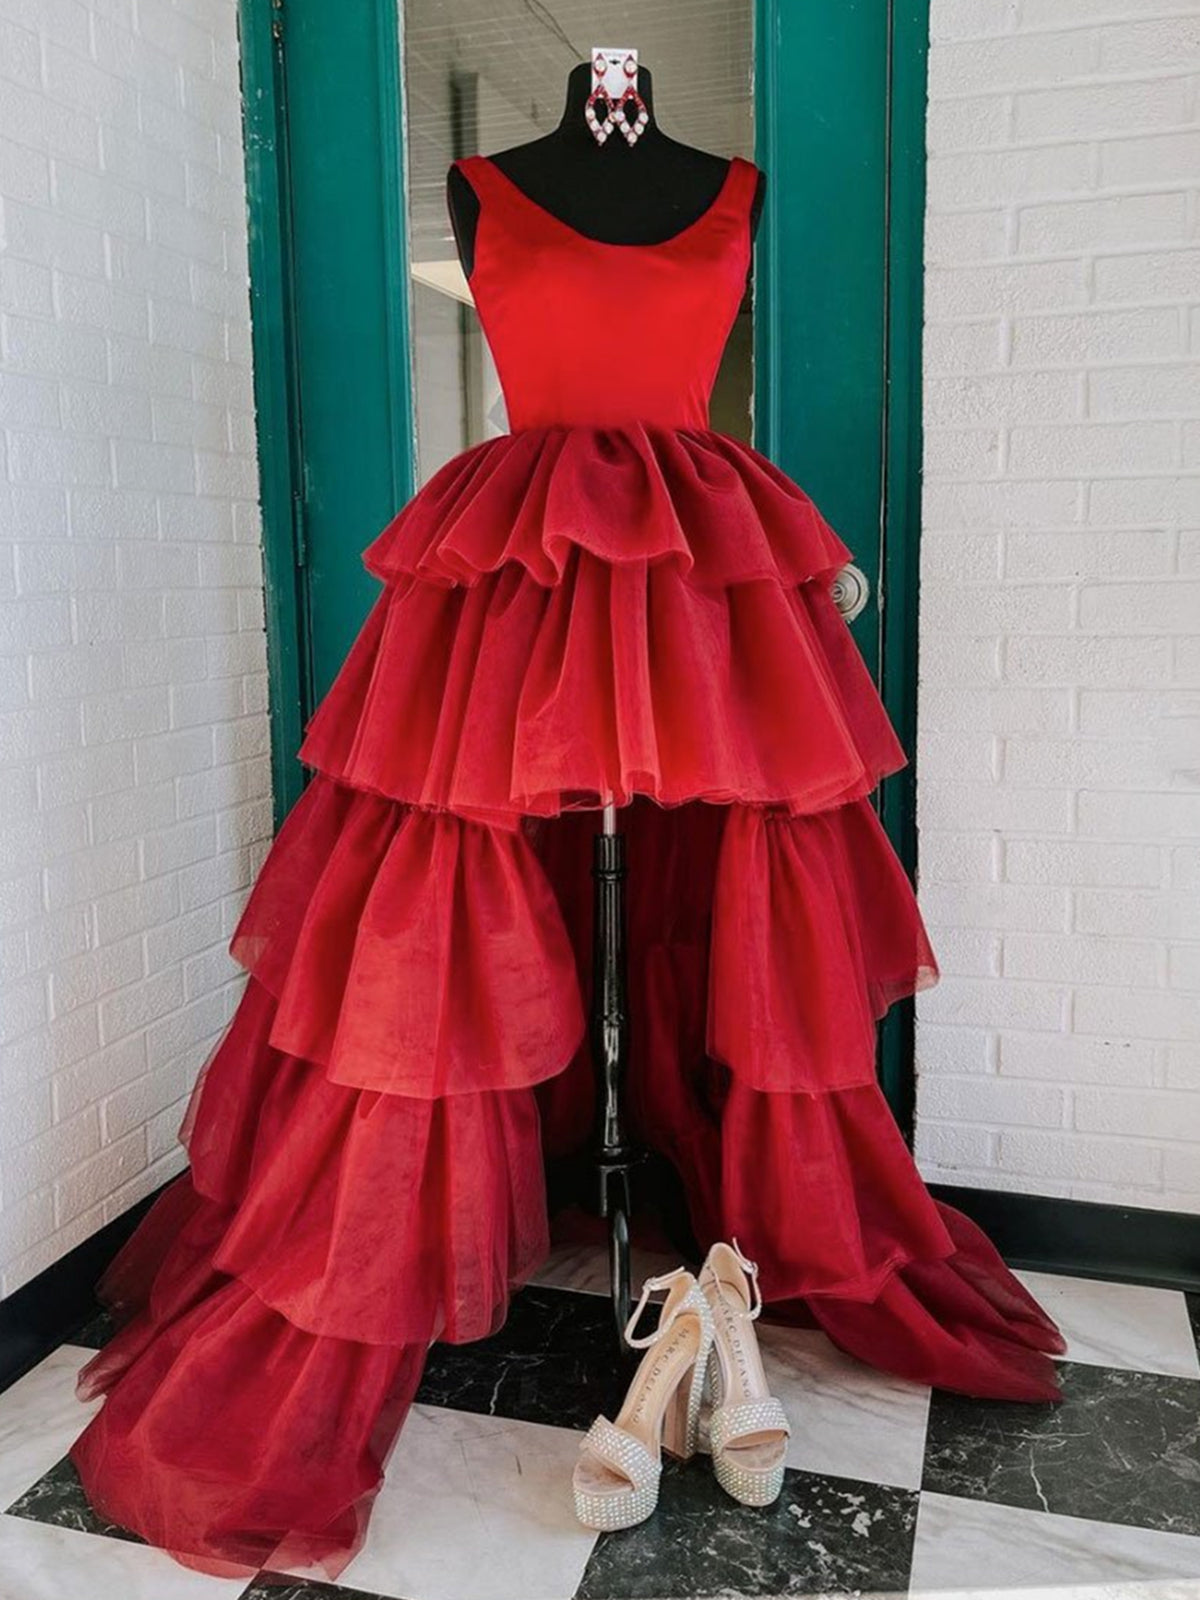 Red High Low Prom Dresses For Black girls For Women, Red High Low Formal Evening Dresses